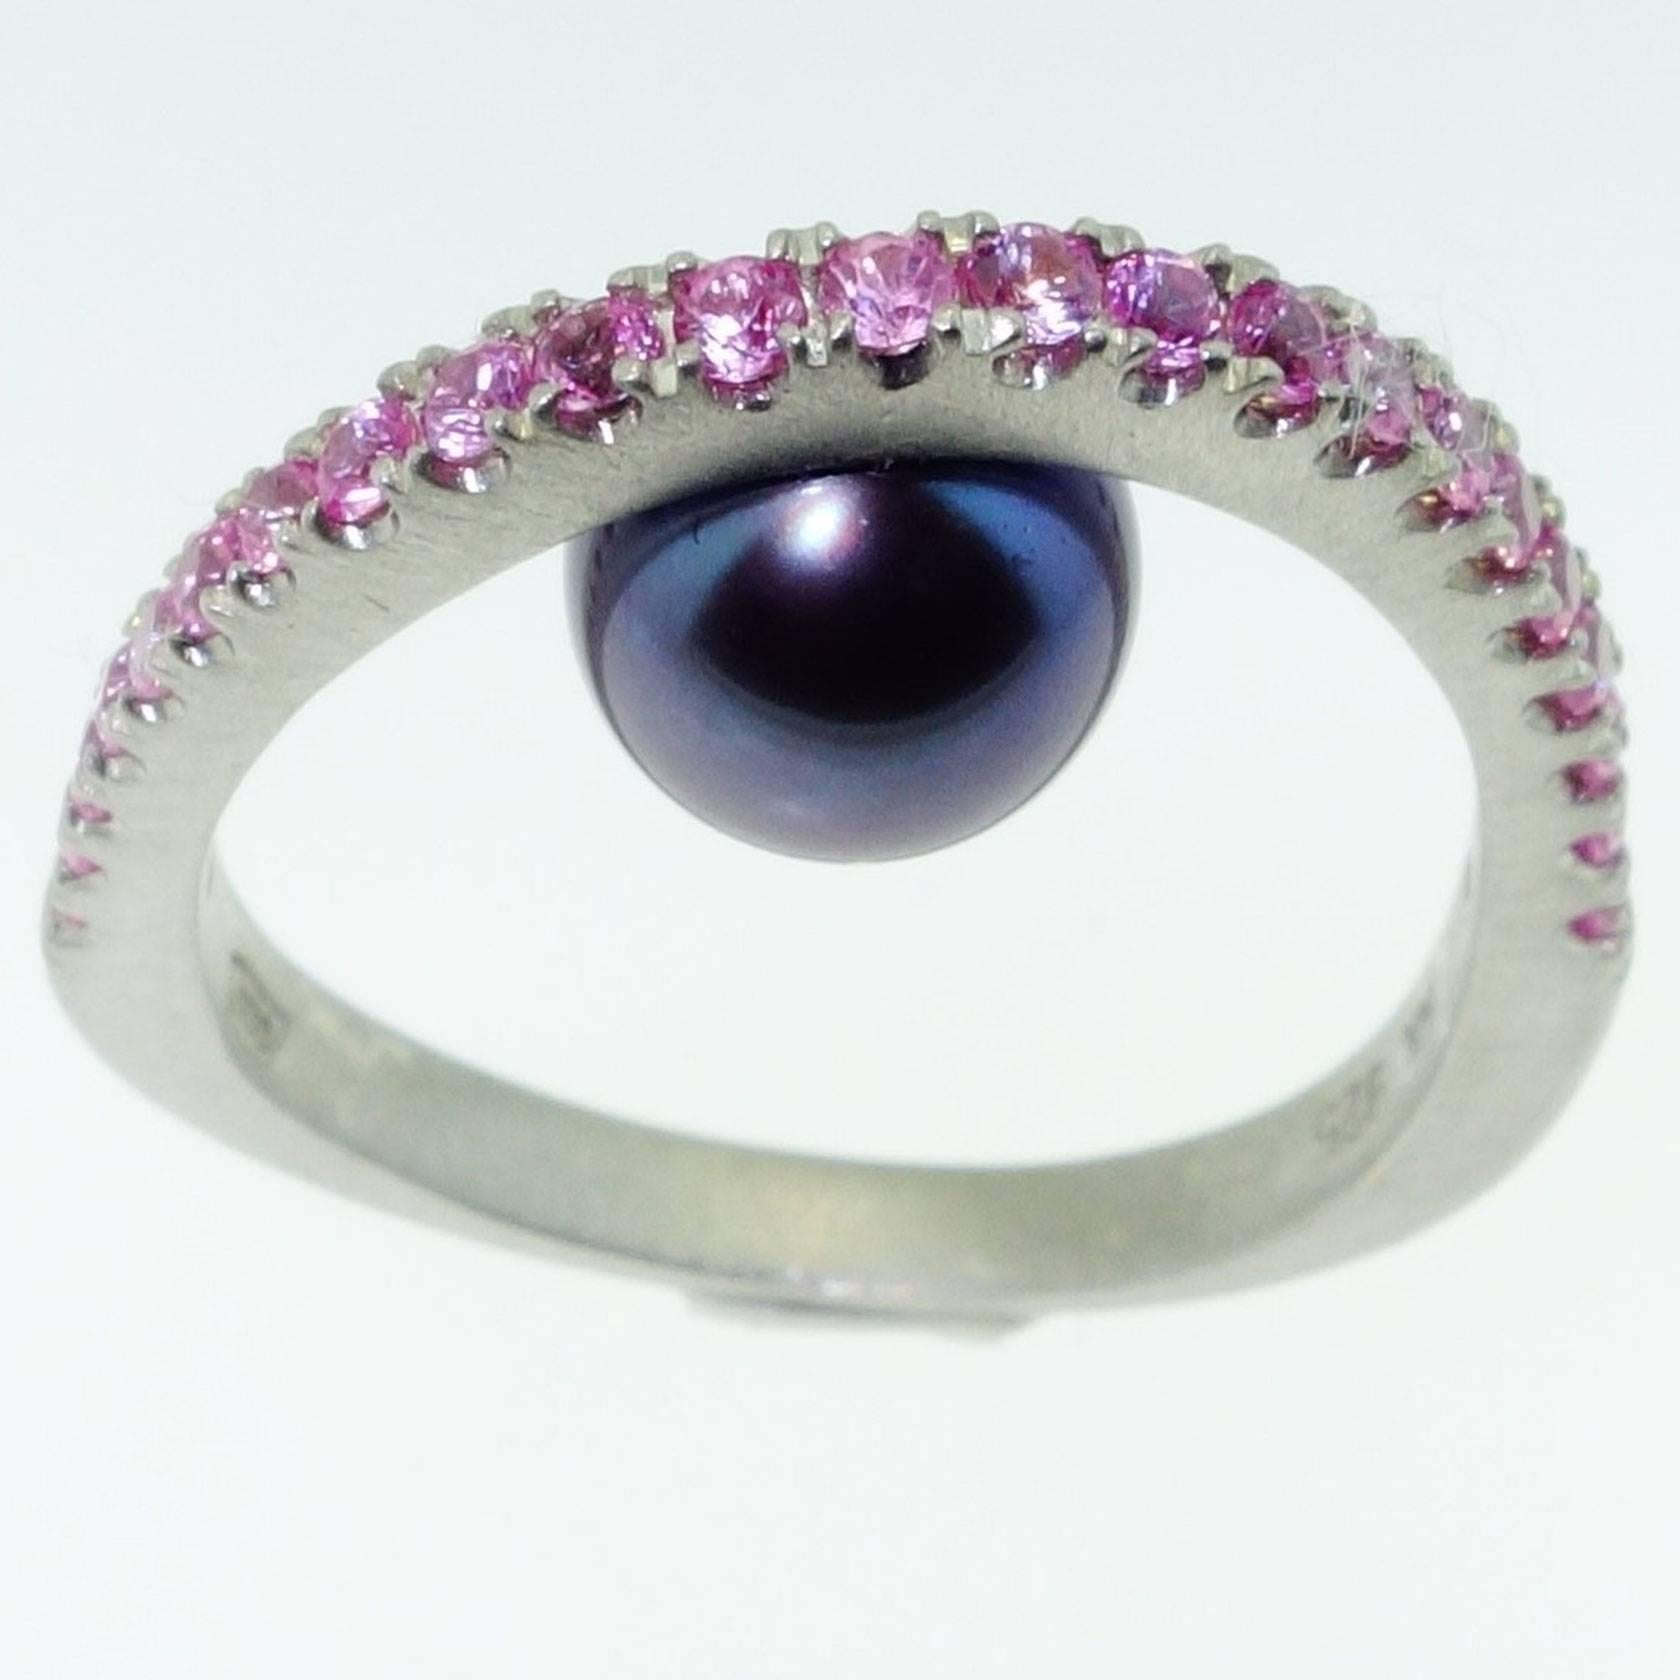 With a Black Peacock freshwater pearl below; top of ring enhanced with Pink Sapphires; approx. 0.70tctw; Sterling Silver Tarnish-resistant Rhodium mounting; Size 8, we offer ring re-sizing. More fabulous in person! A Striking Statement, Stylish and